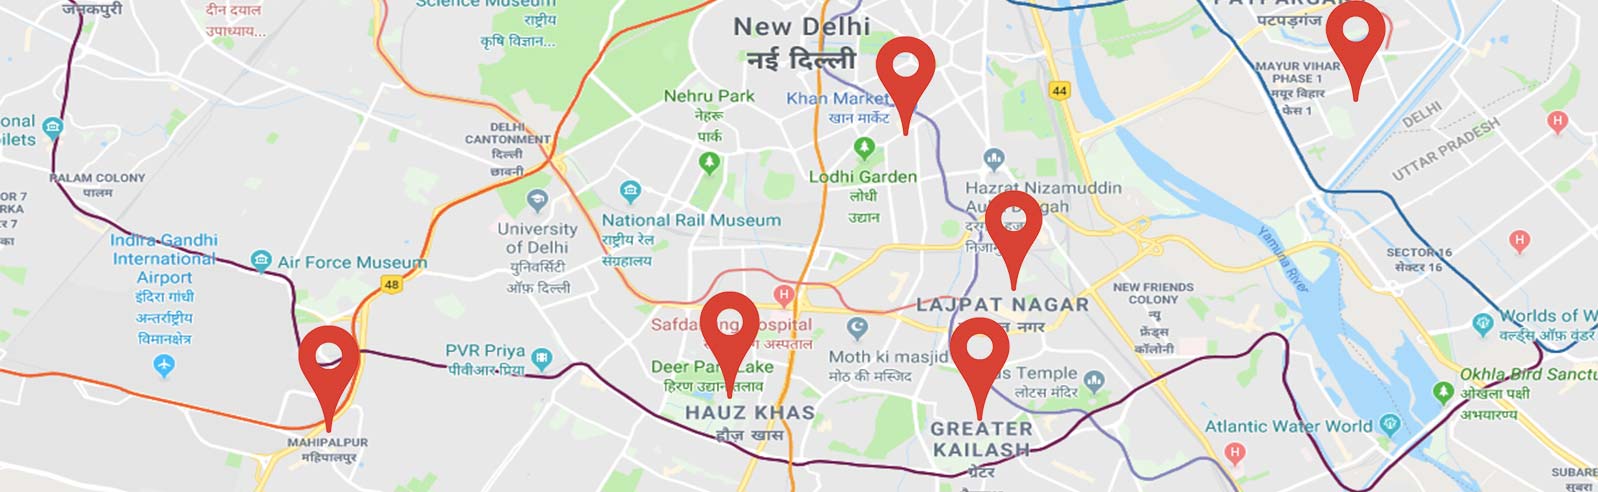 affordable escorts services location map